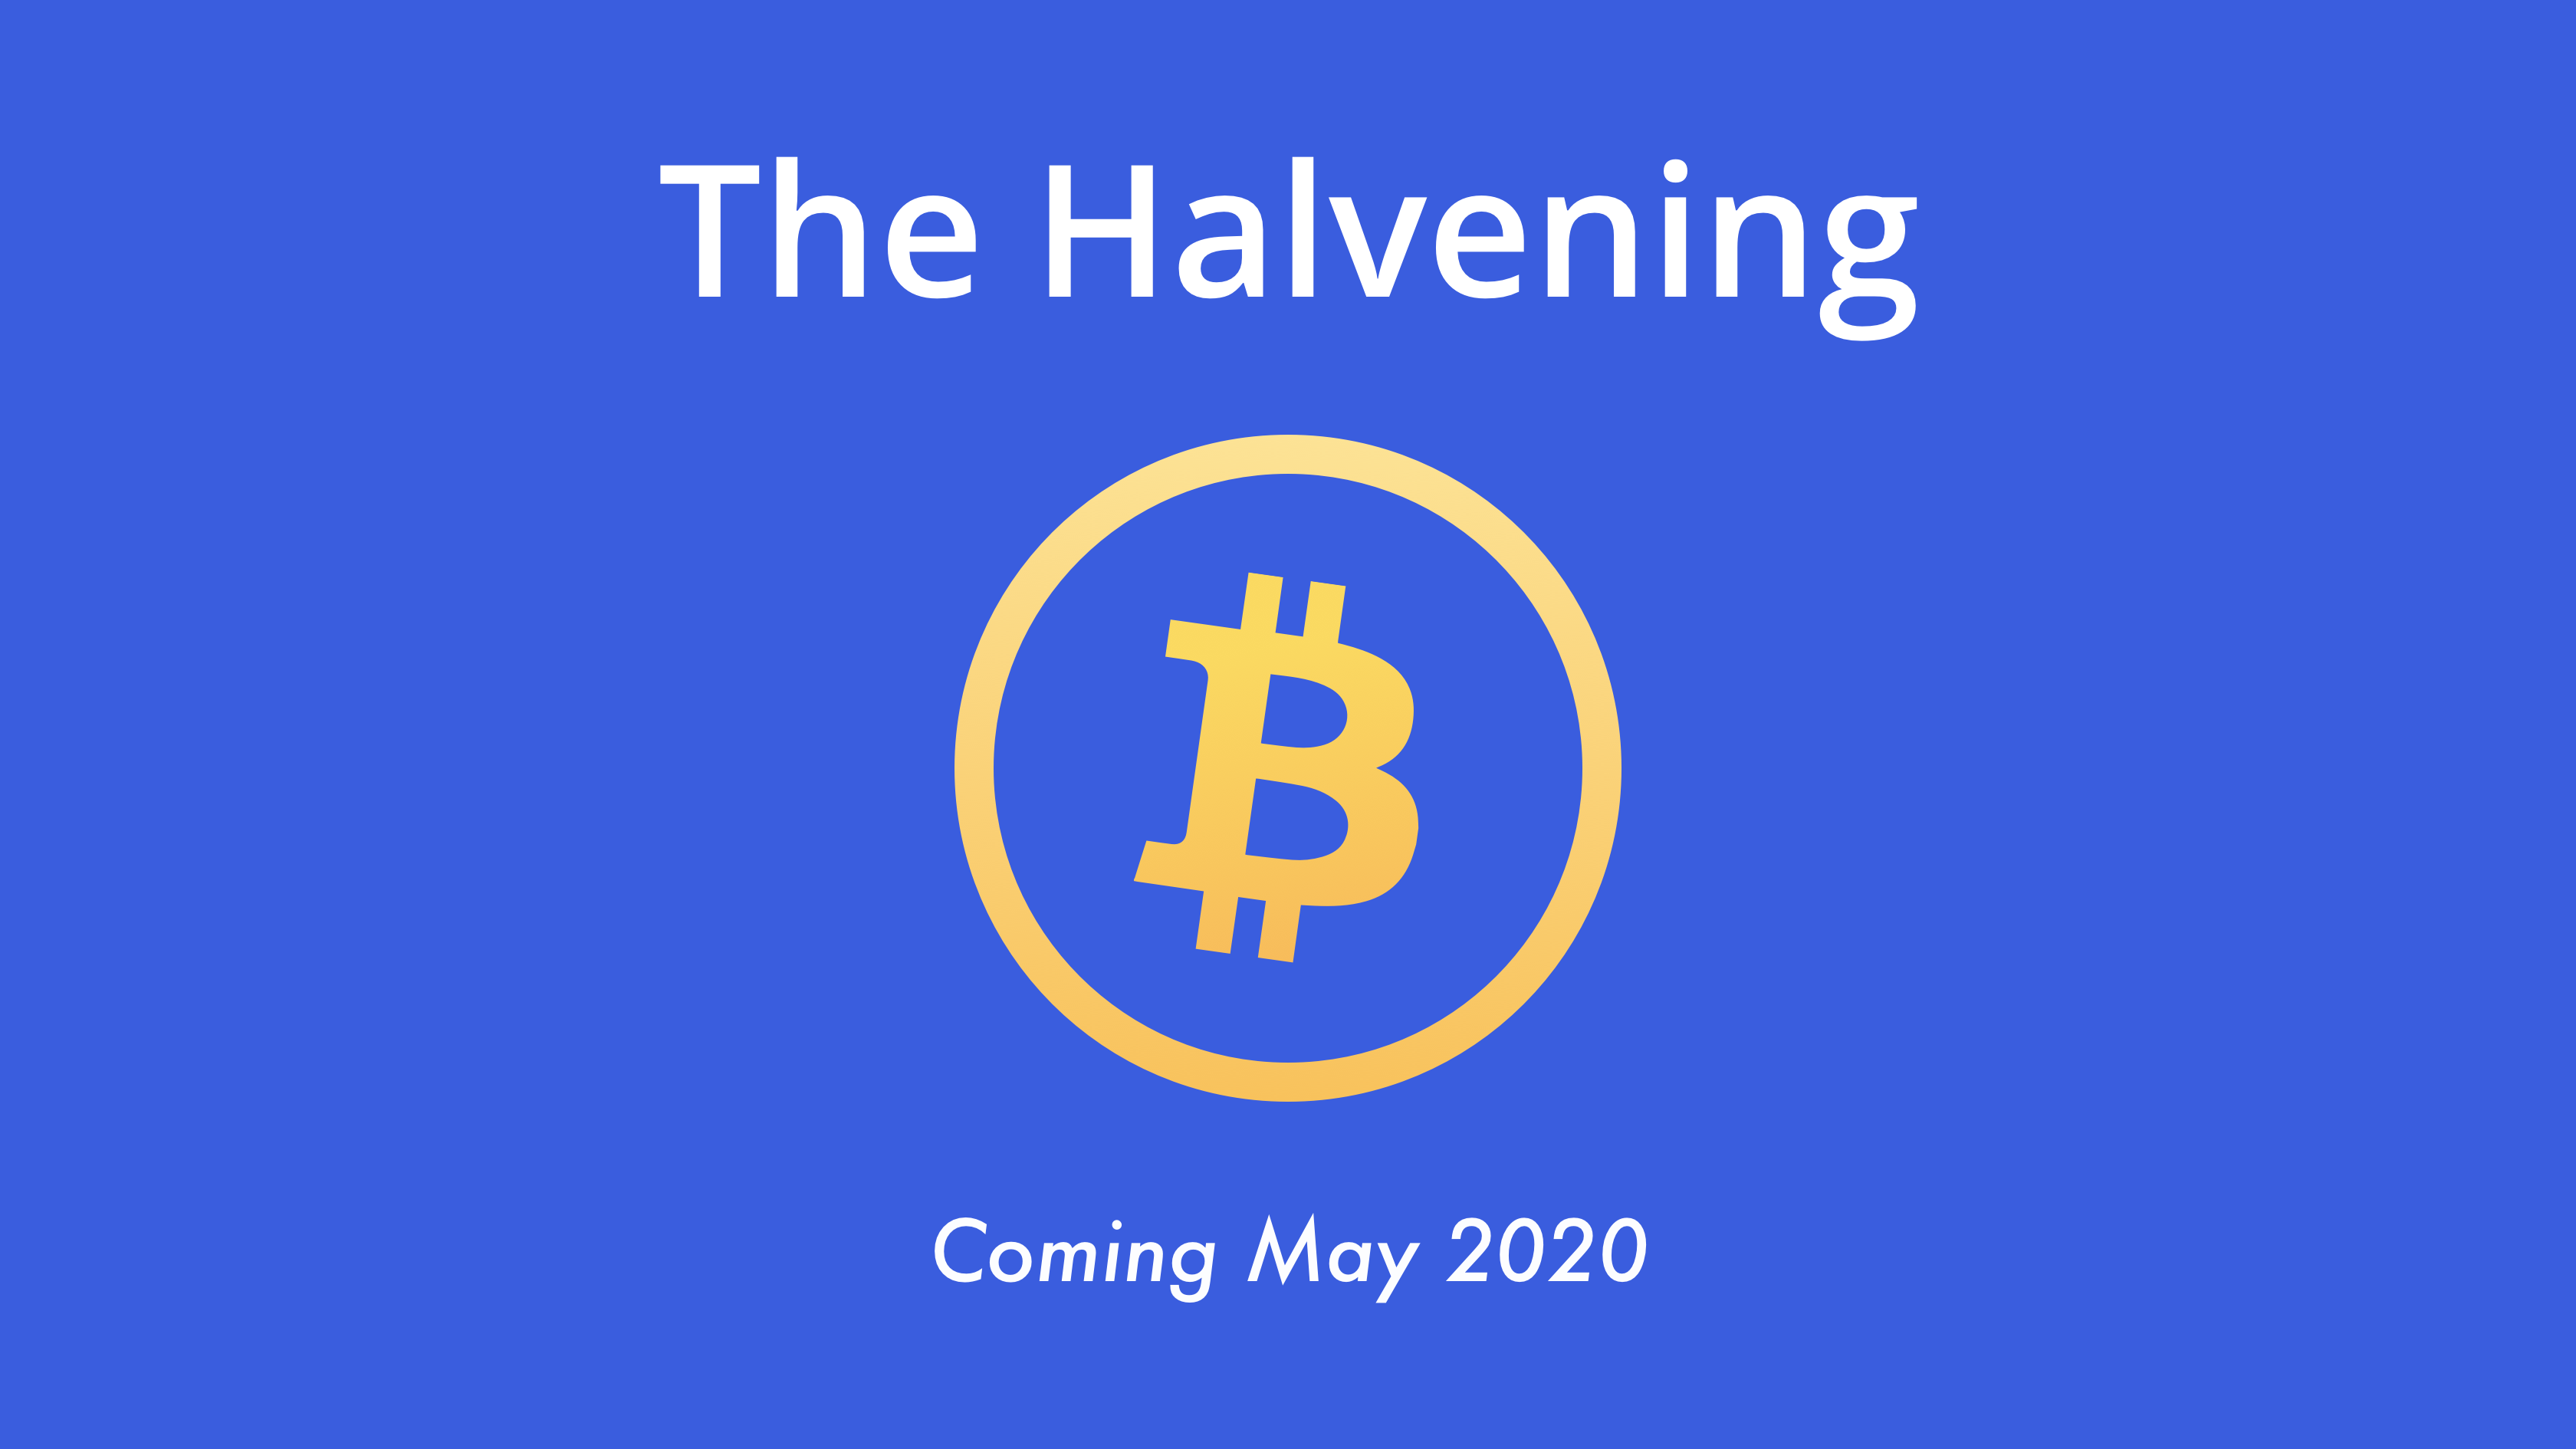 The Next Bitcoin Halving Is Coming What Does This Mean For You